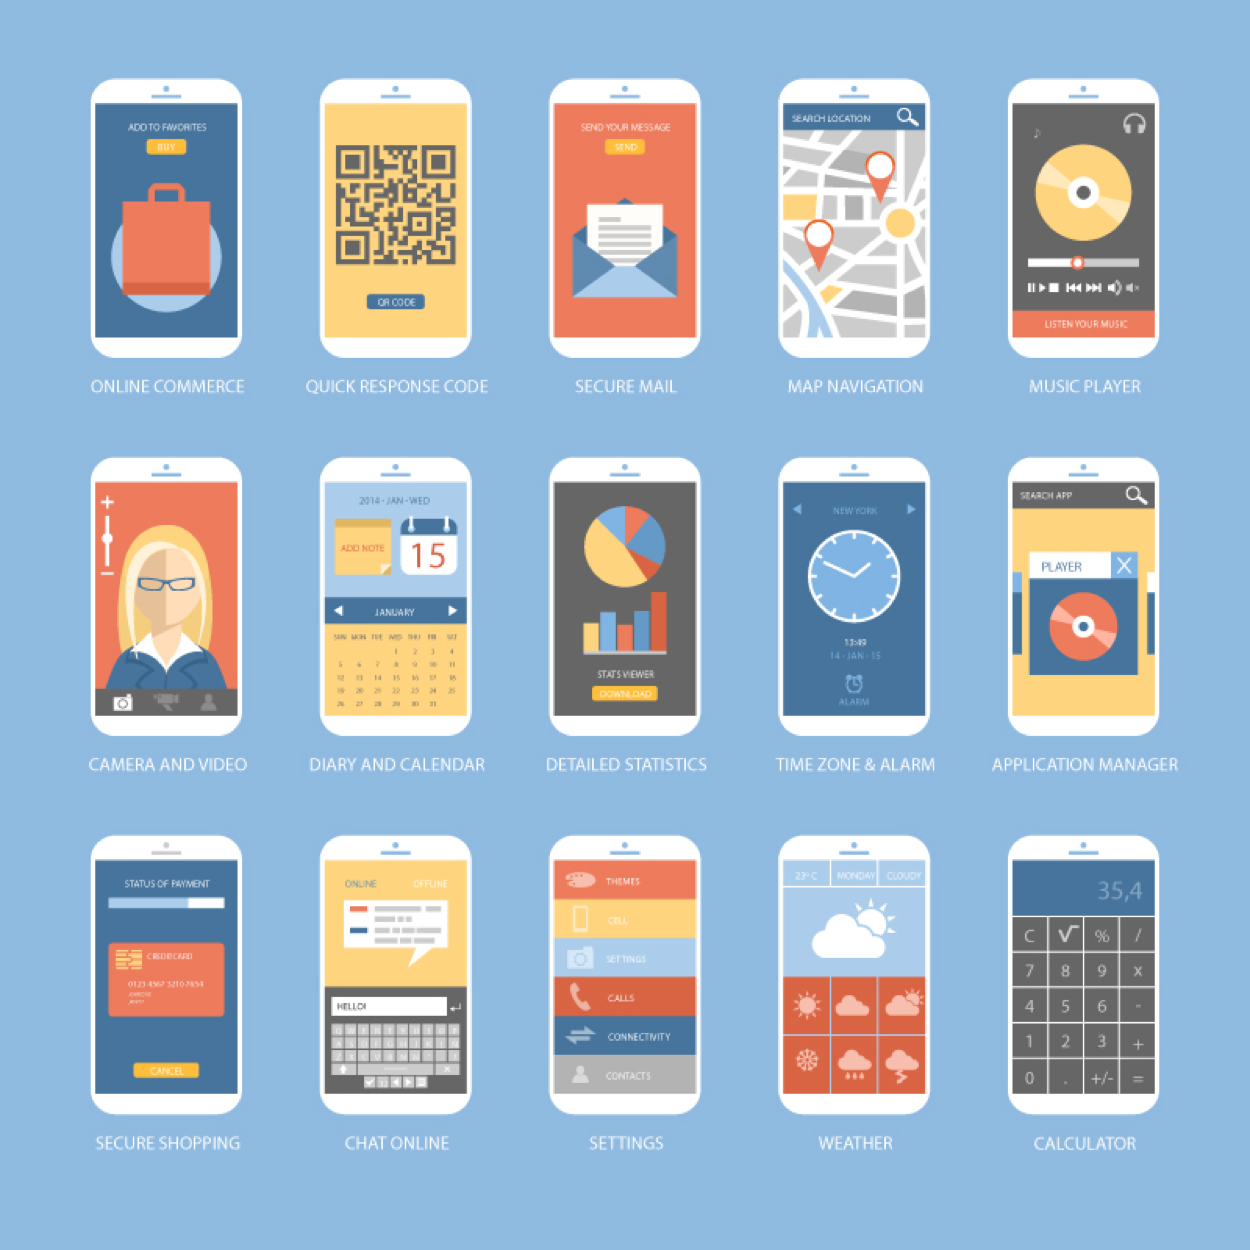 6 Necessary Elements For Designing A Perfect Mobile App User Interface